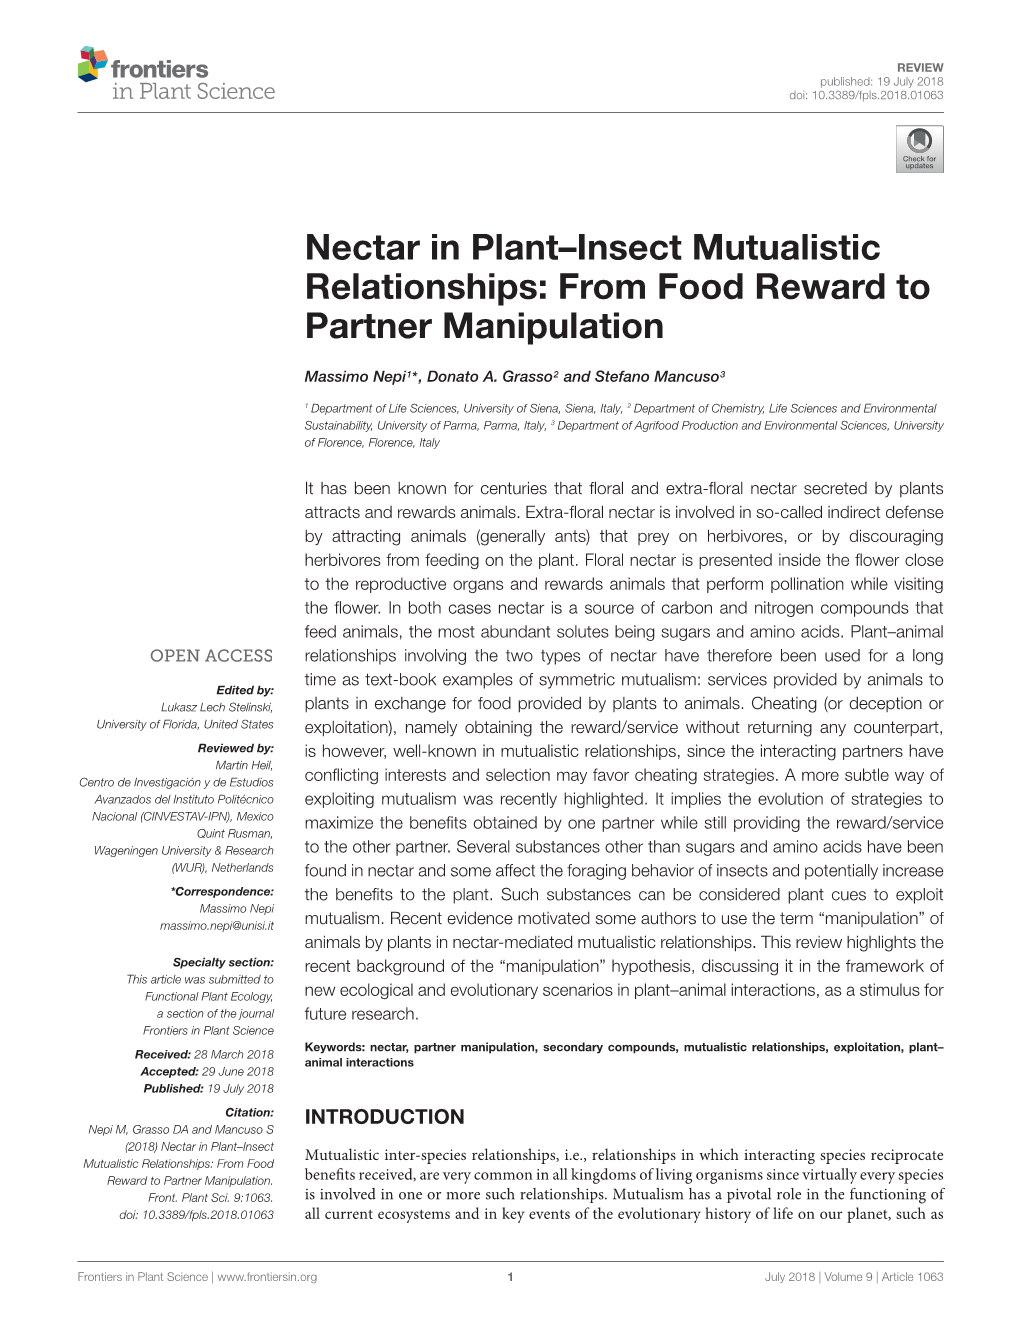 Nectar in Plant–Insect Mutualistic Relationships: from Food Reward to Partner Manipulation